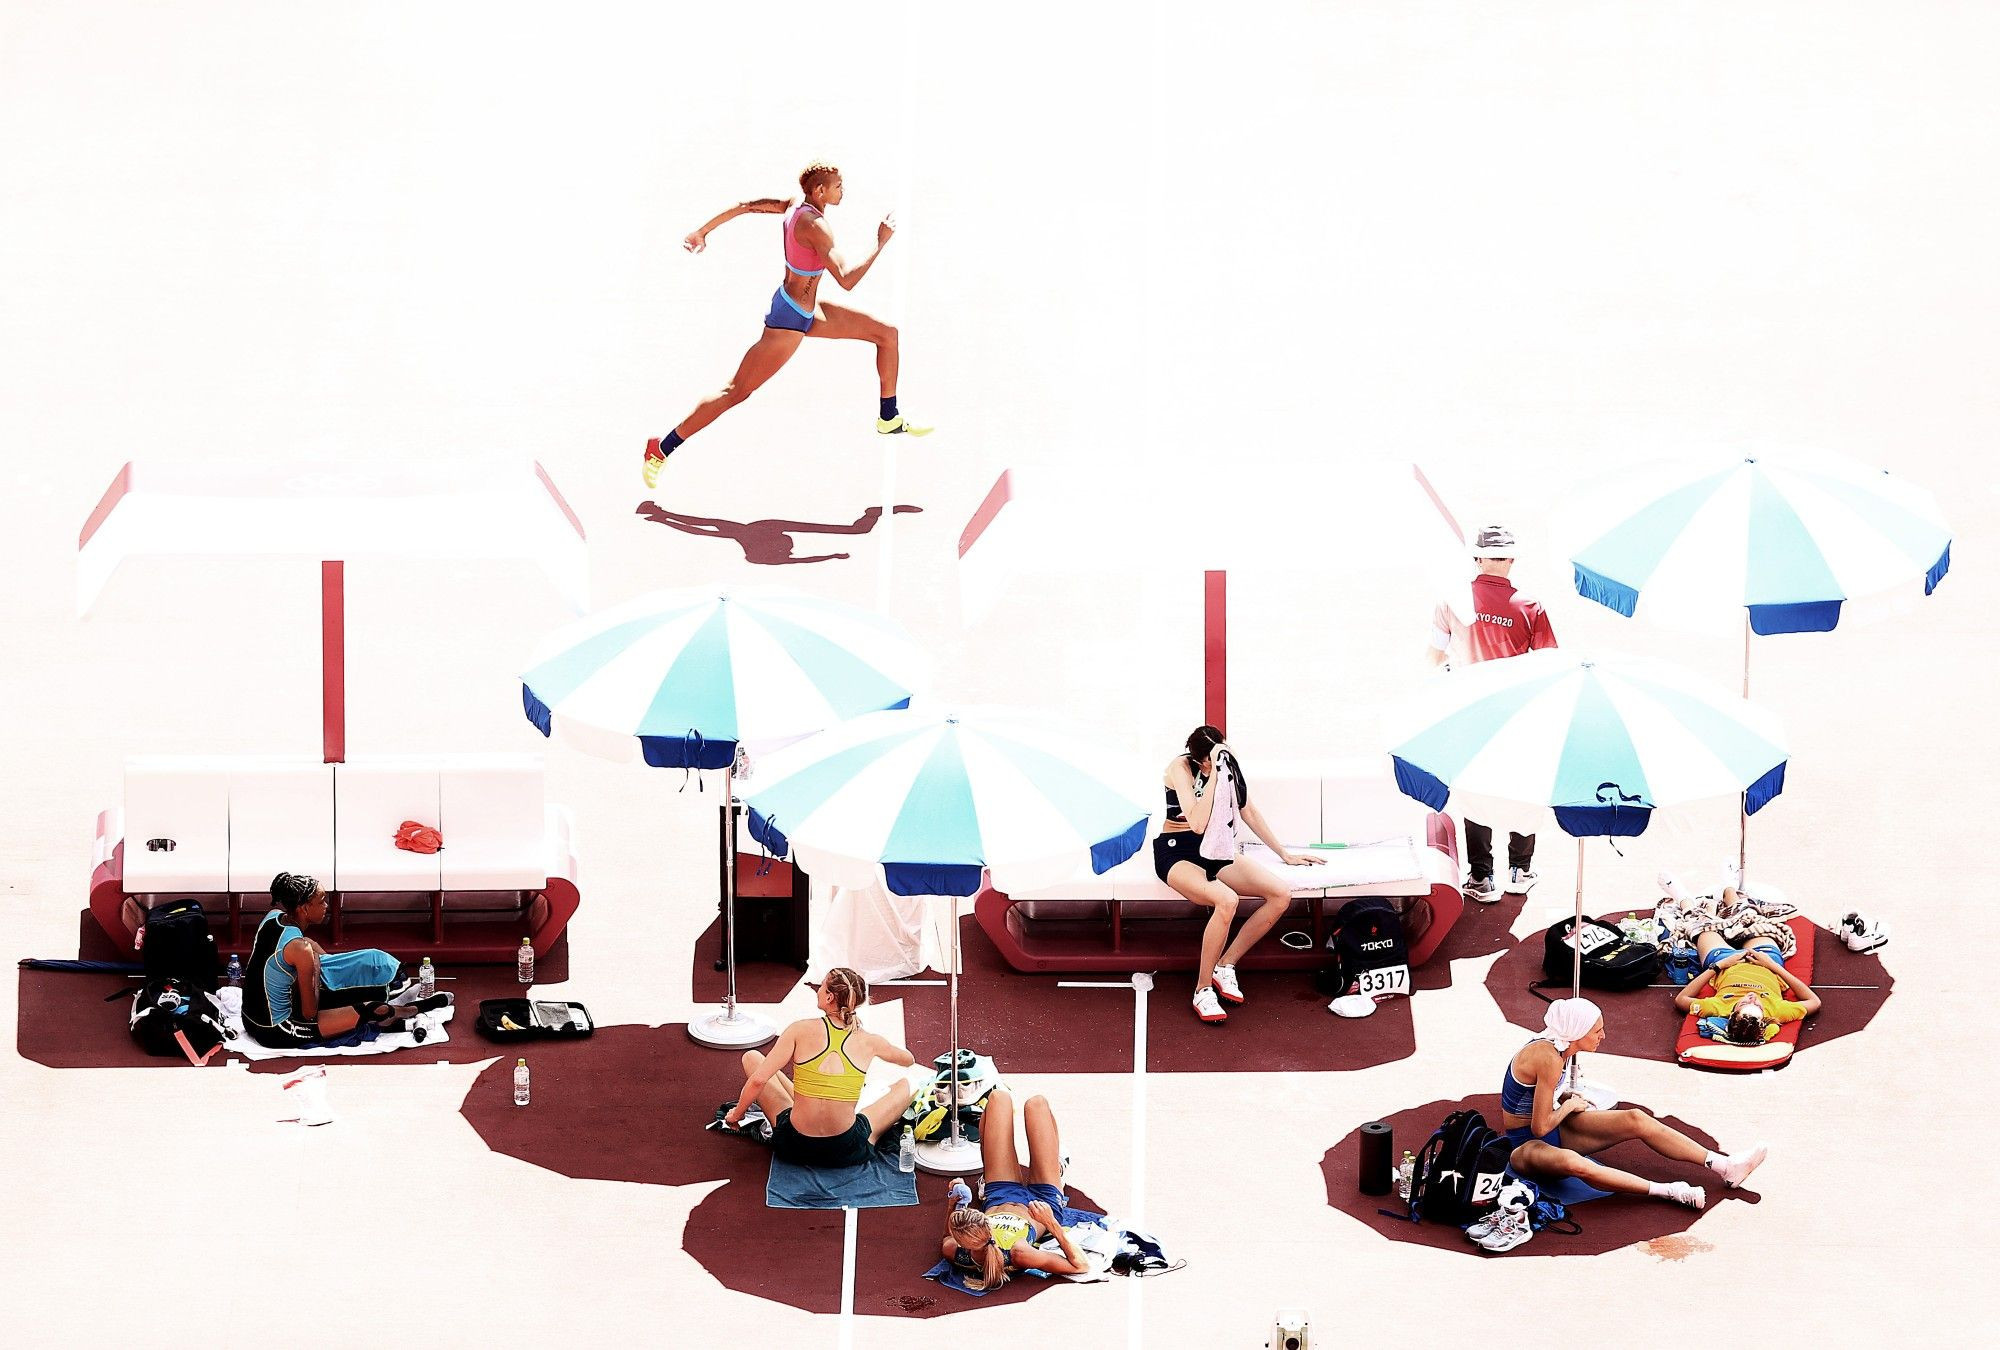 This study of women's high jump qualifying on a baking morning at the Tokyo Olympics won Ryan Pierse the Jean-PIerre Durand World Athletics Photograph of the Year award  ©World Athletics